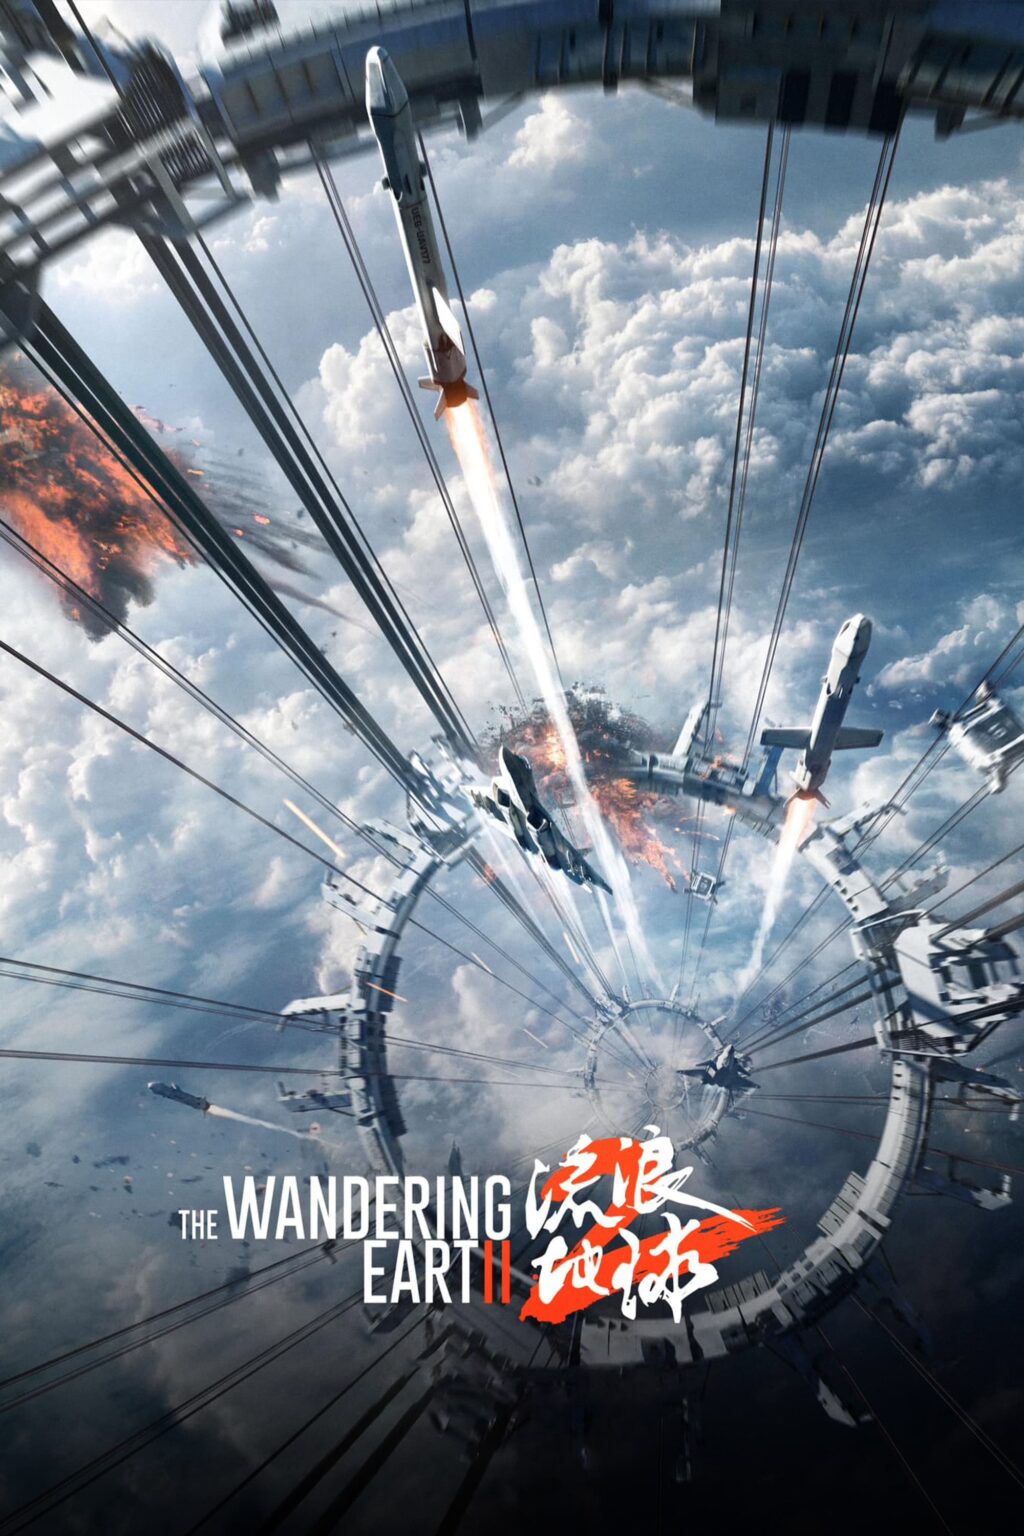 Poster for the movie "The Wandering Earth II"